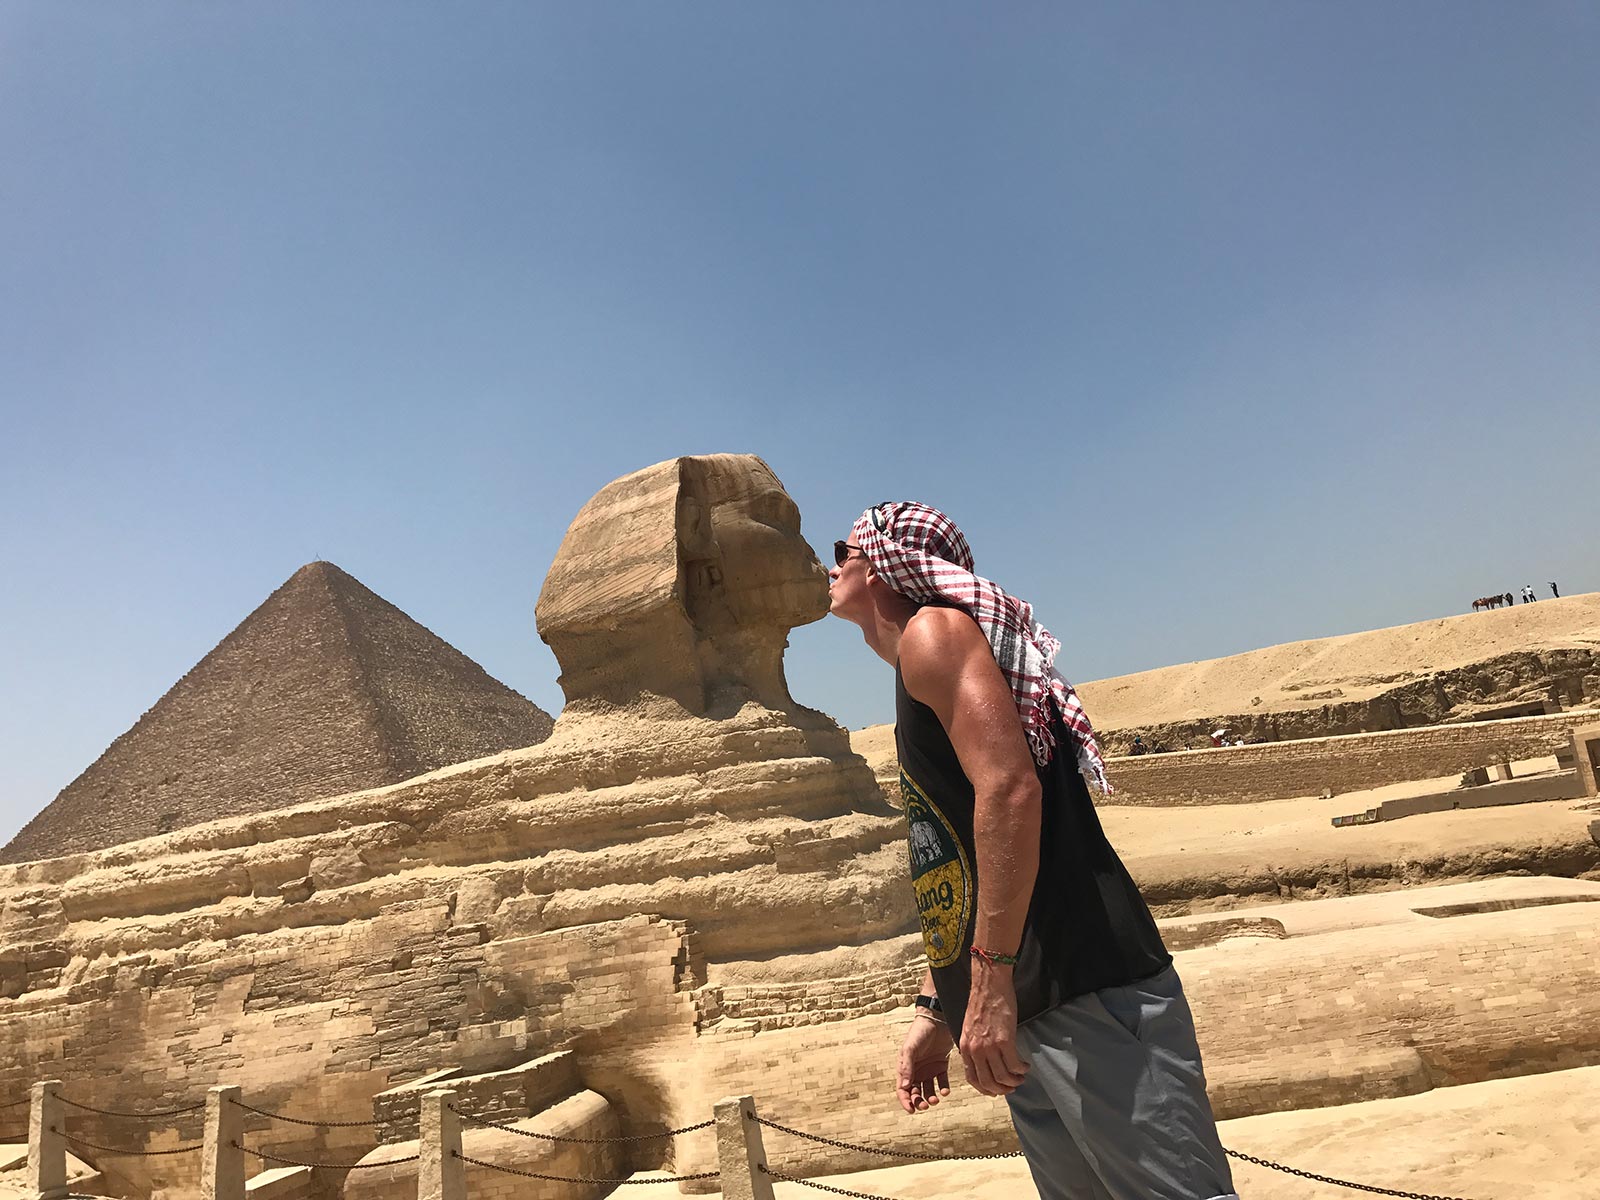 David Simpson kissing the Sphinx near a pyramid in Cairo, Egypt. Getting inside the Ancient Pyramids of Giza